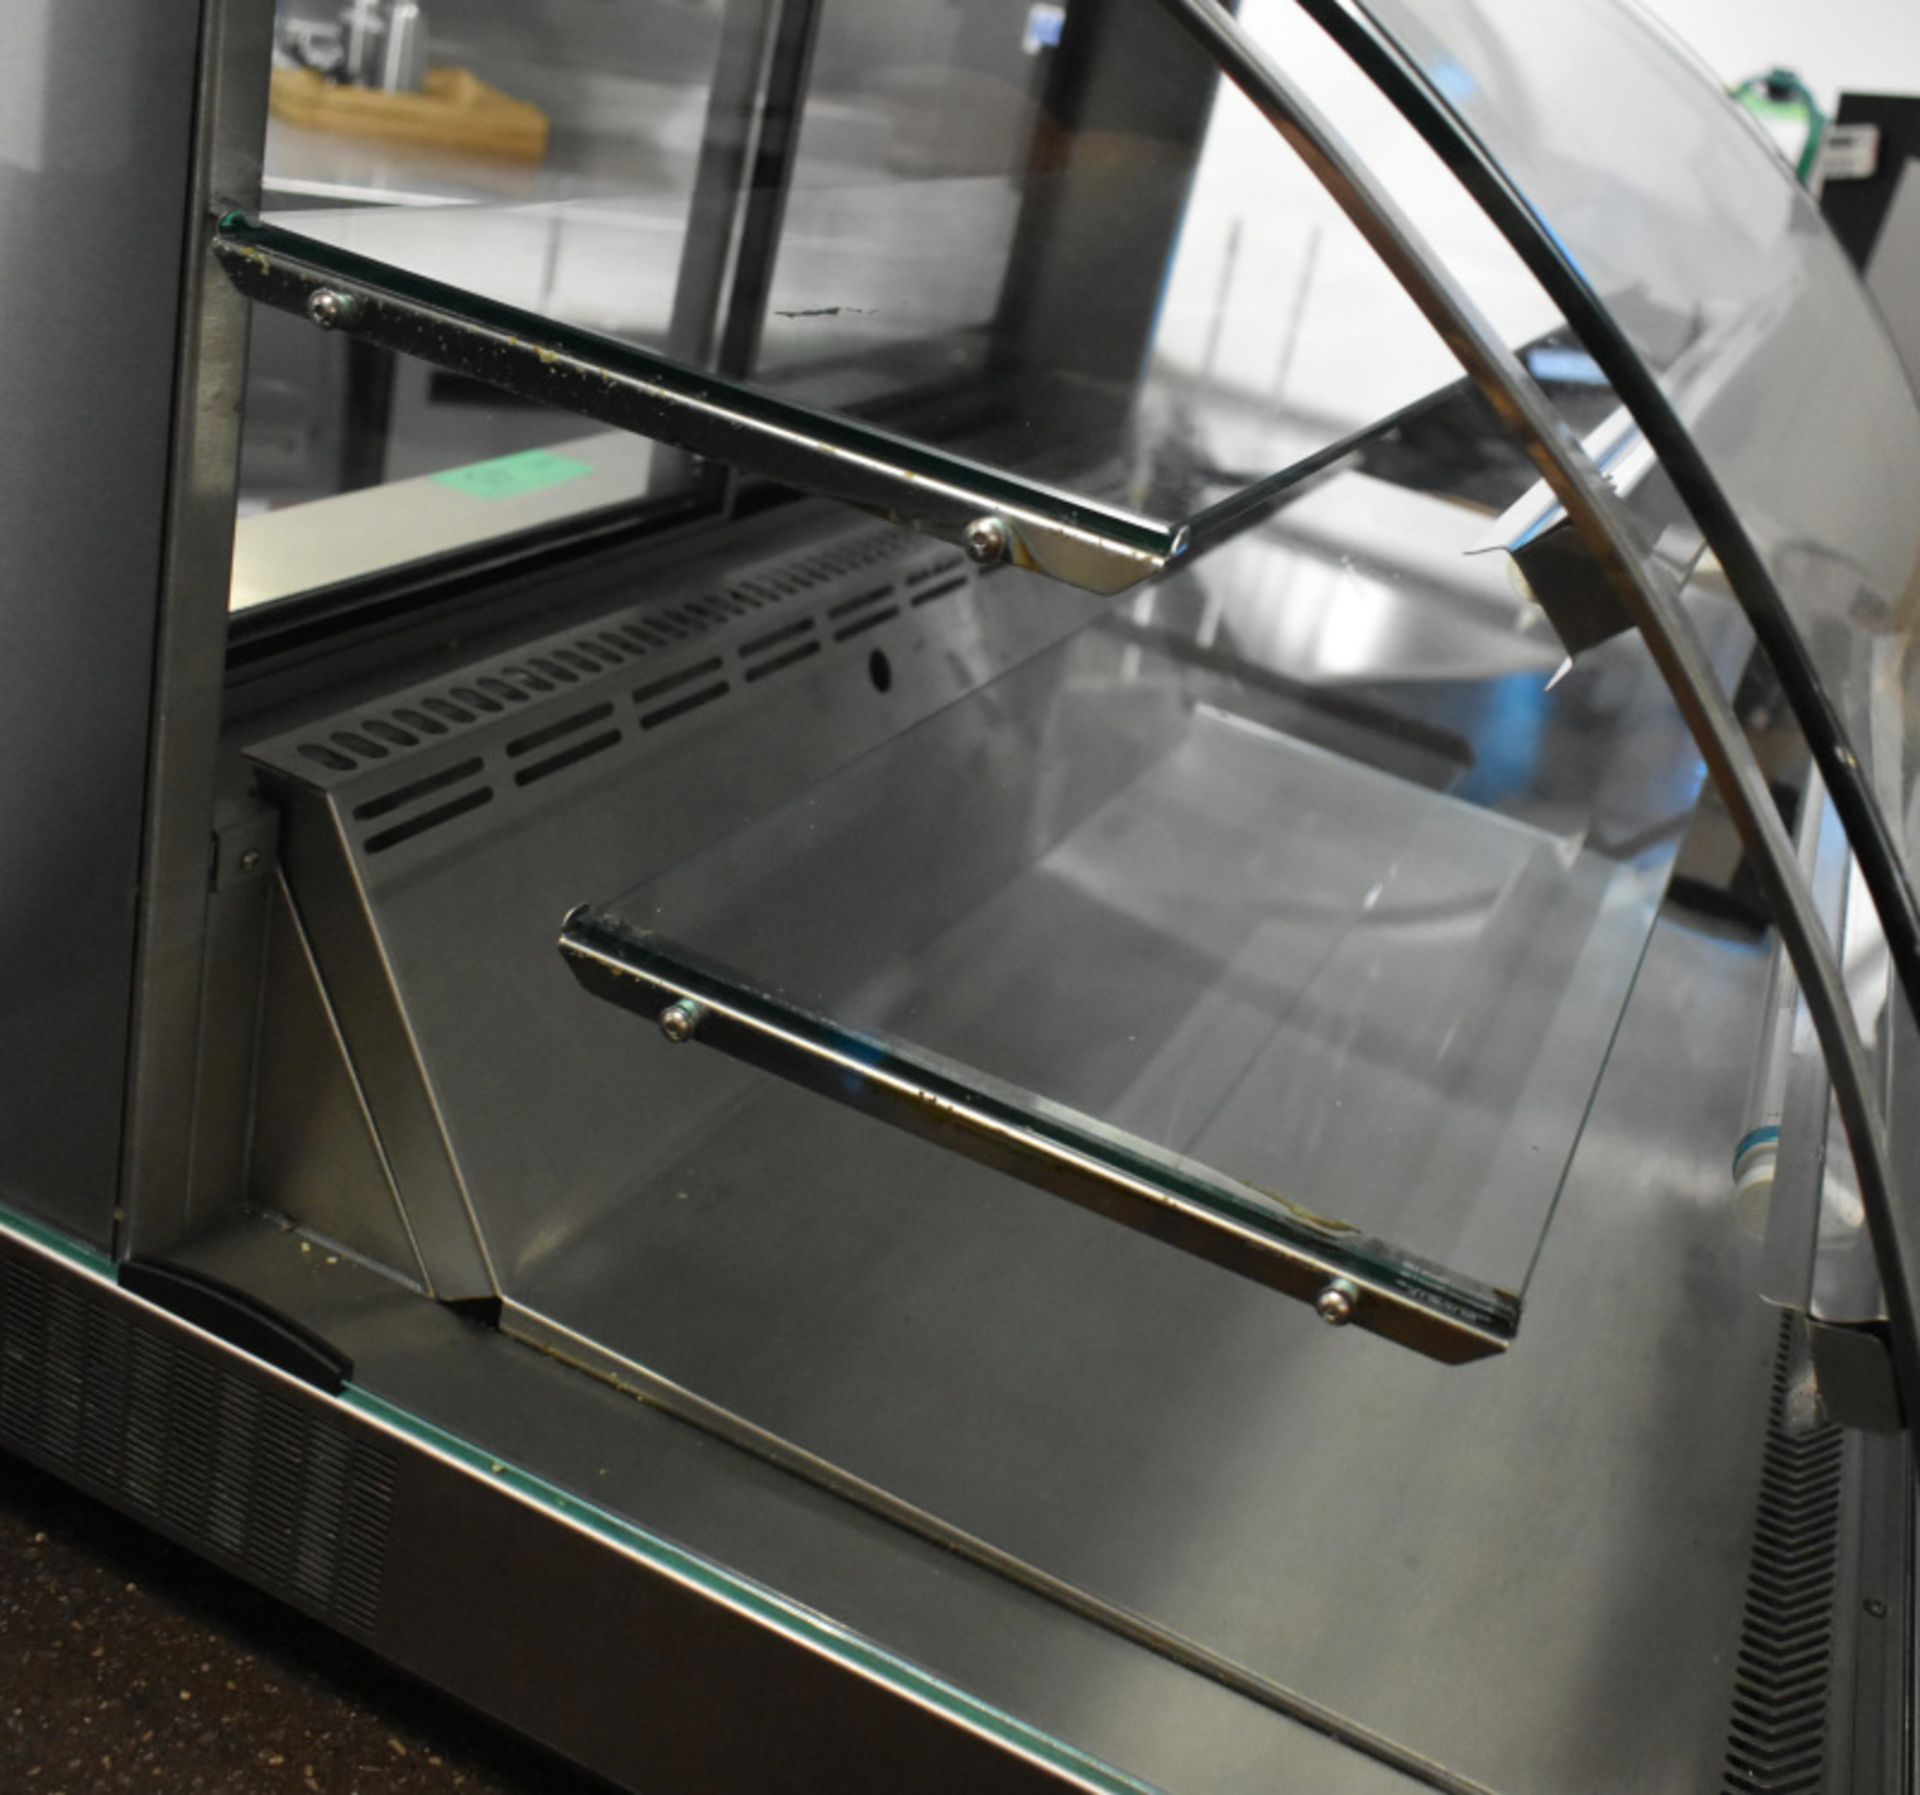 Counterline Hot food display unit, L 780mm x W 740mm x H 630mm - Image 3 of 3